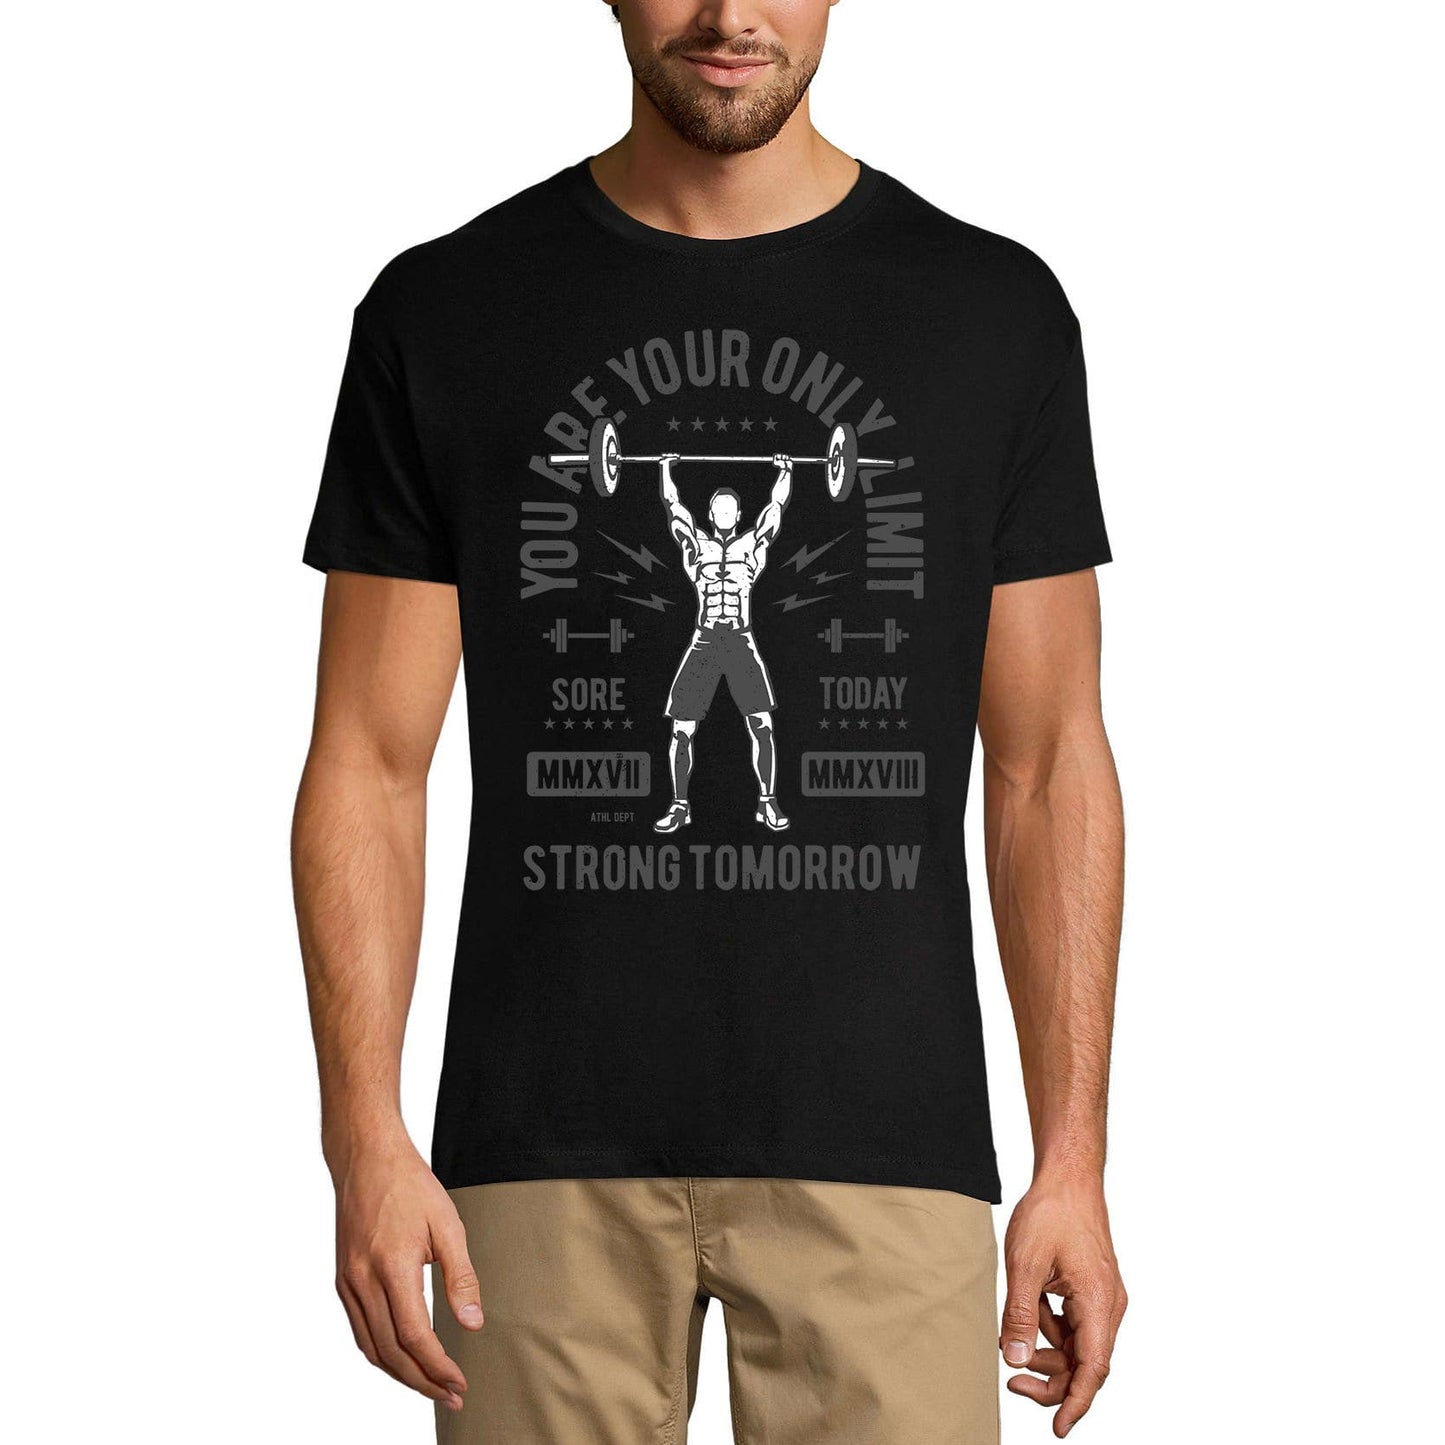 ULTRABASIC Men's T-Shirt You Are Your Only Limit - Strong Tomorrow Tee Shirt